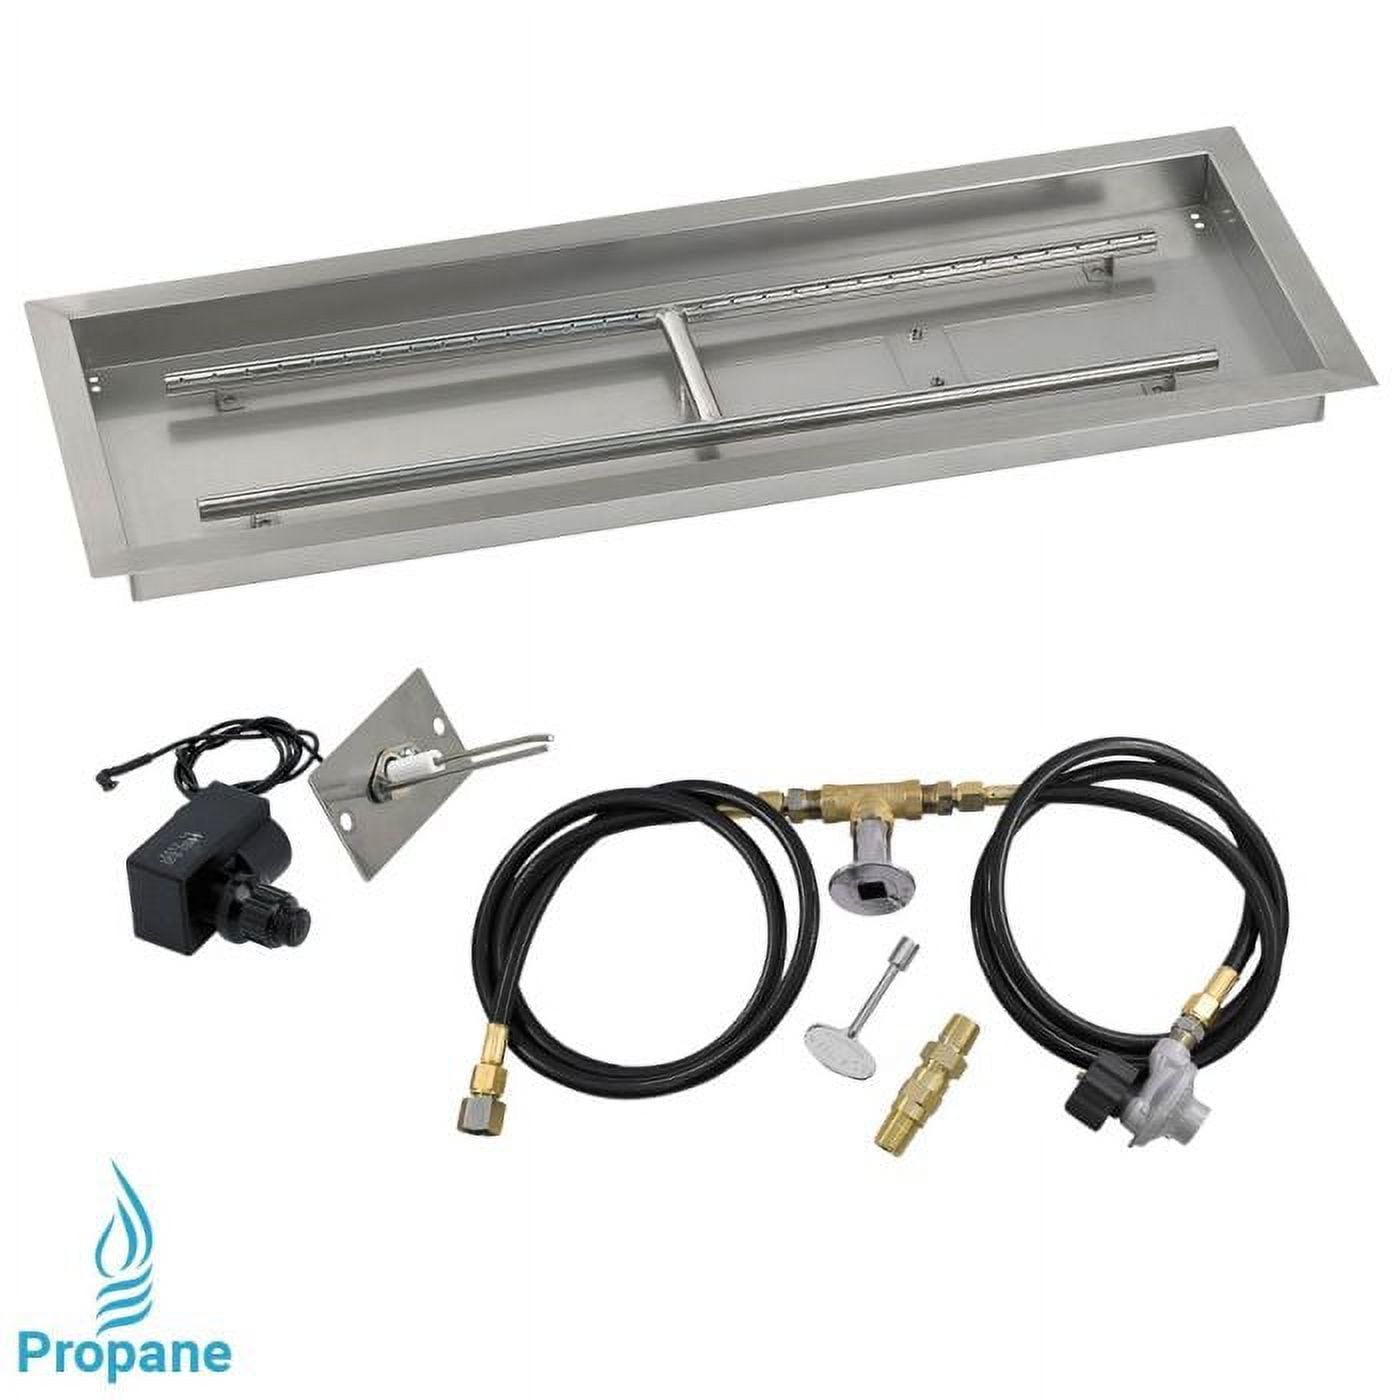 36 X 12 In. Rectangular Stainless Steel Drop-in Firepit Pan With Spark Ignition Kit - Propane